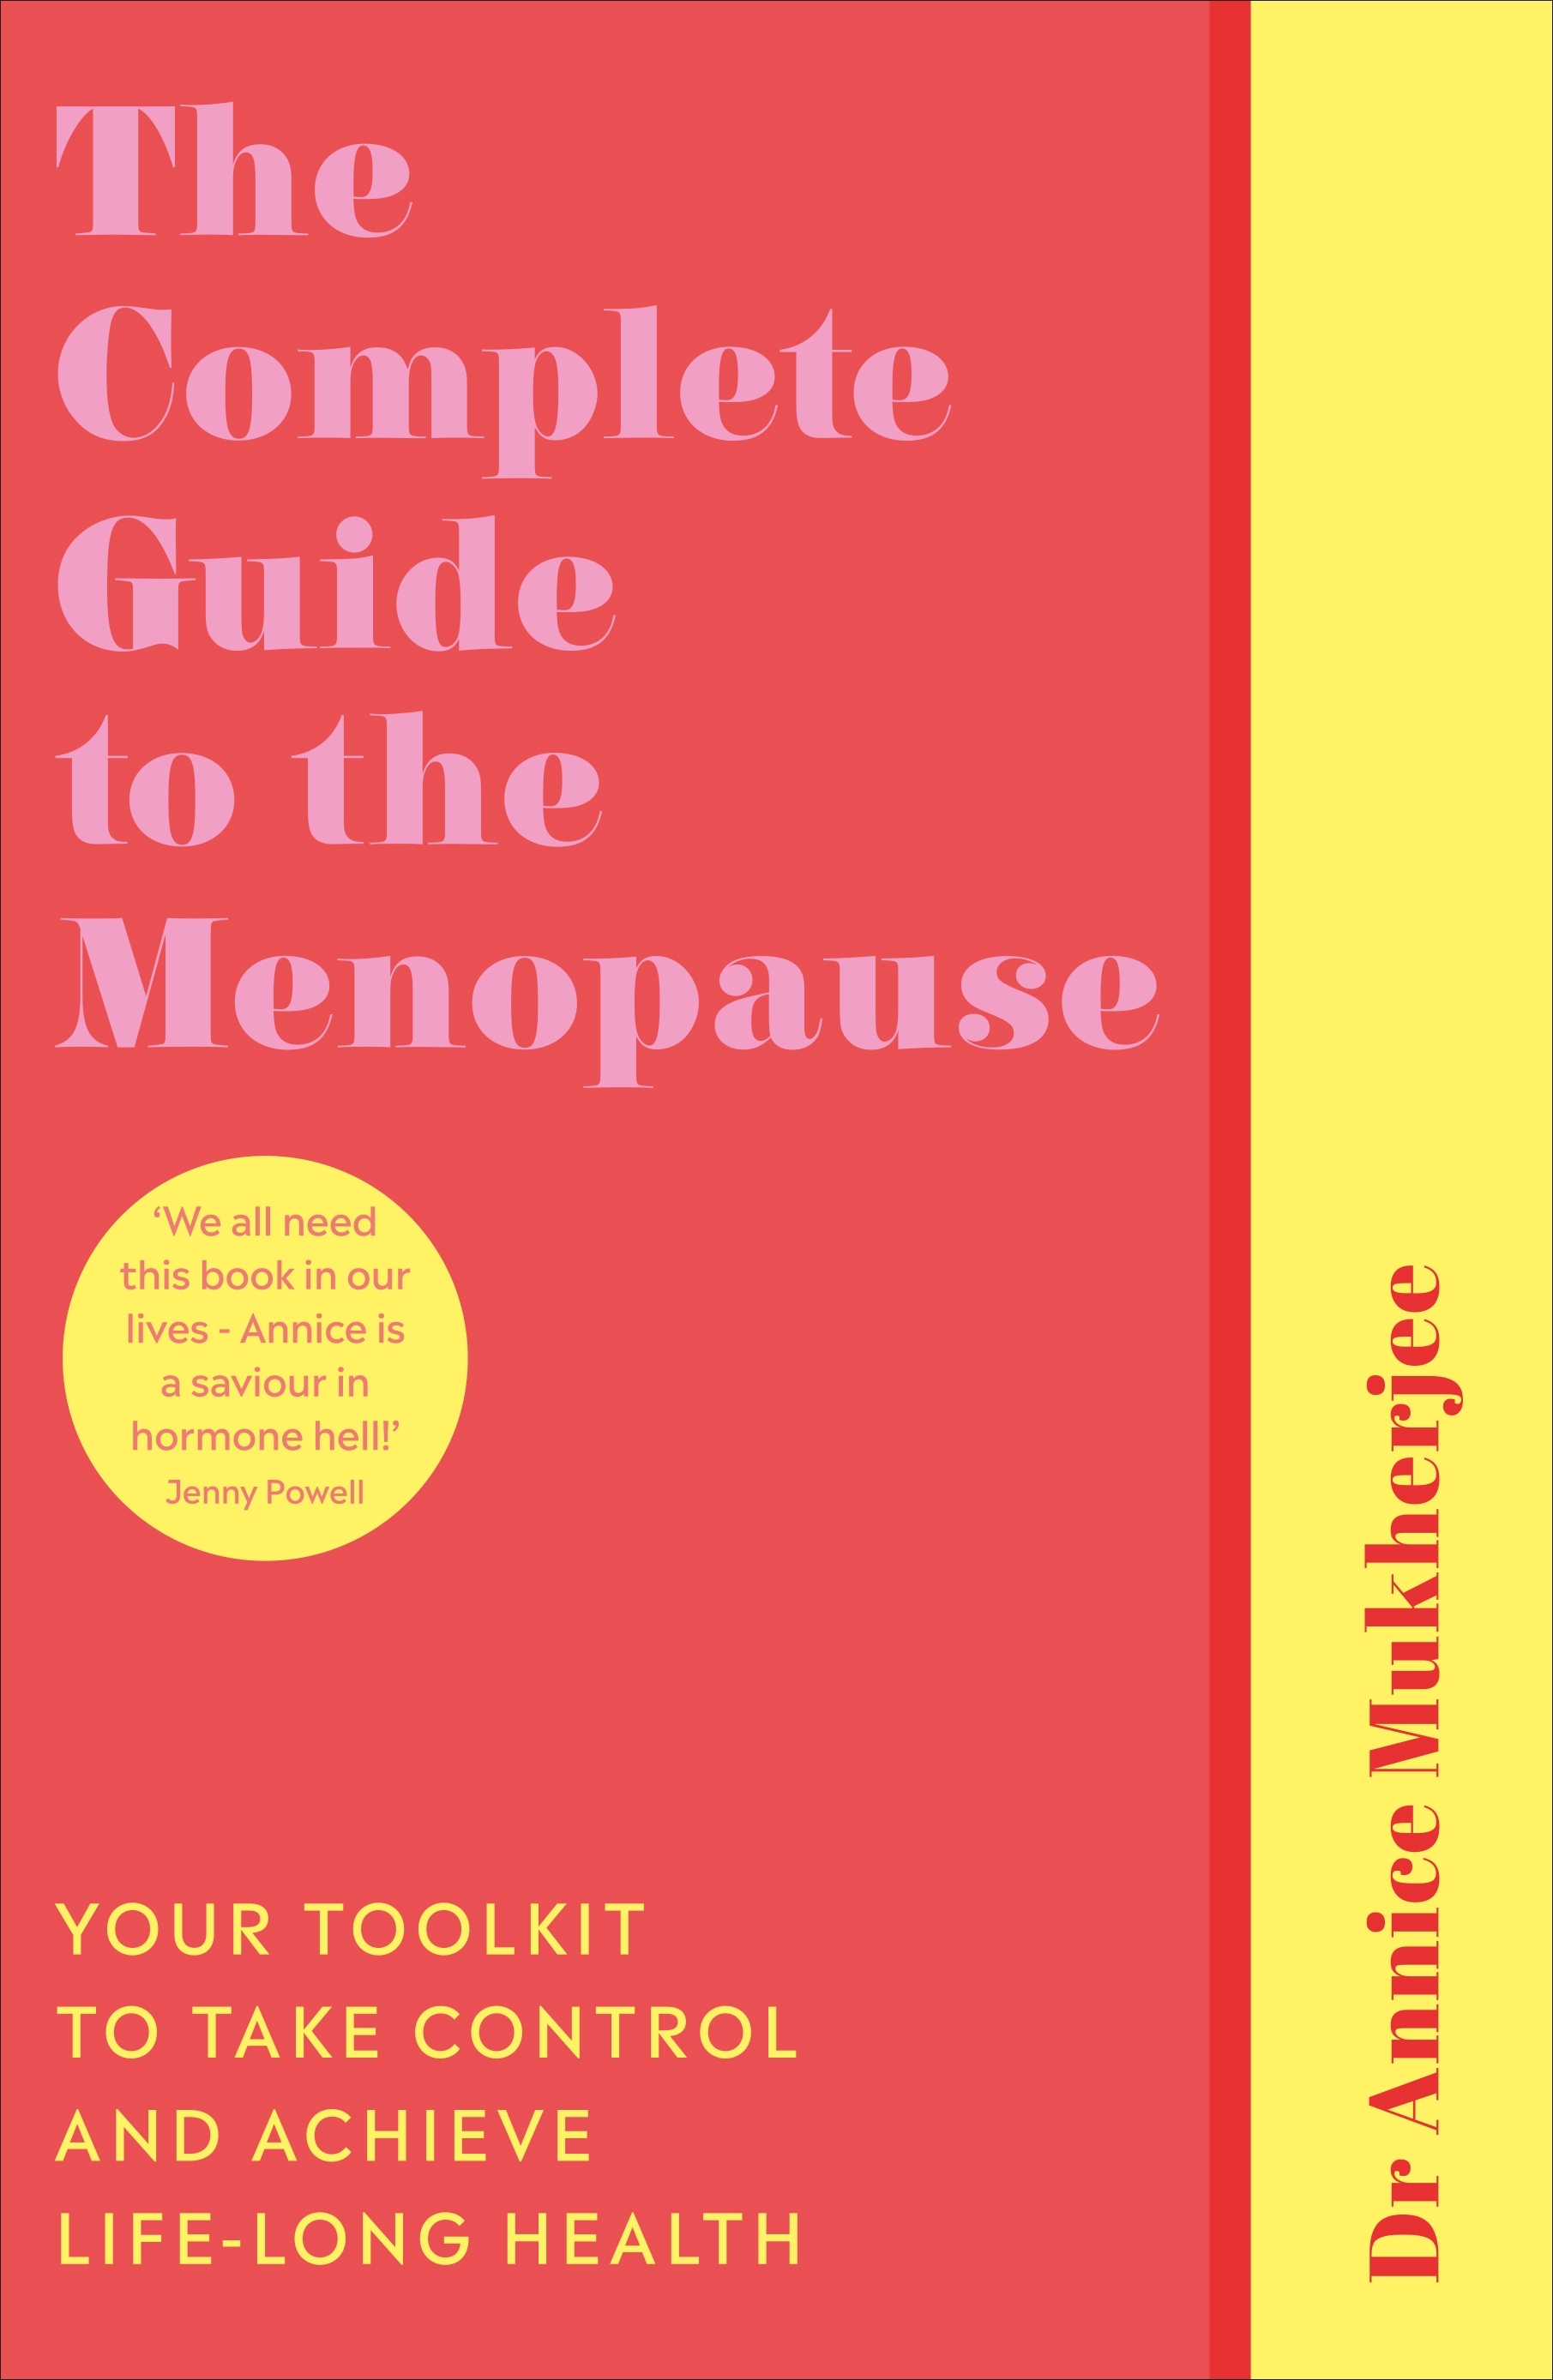 The Complete Guide To The Menopause By Annice Mukherjee Penguin Books Australia